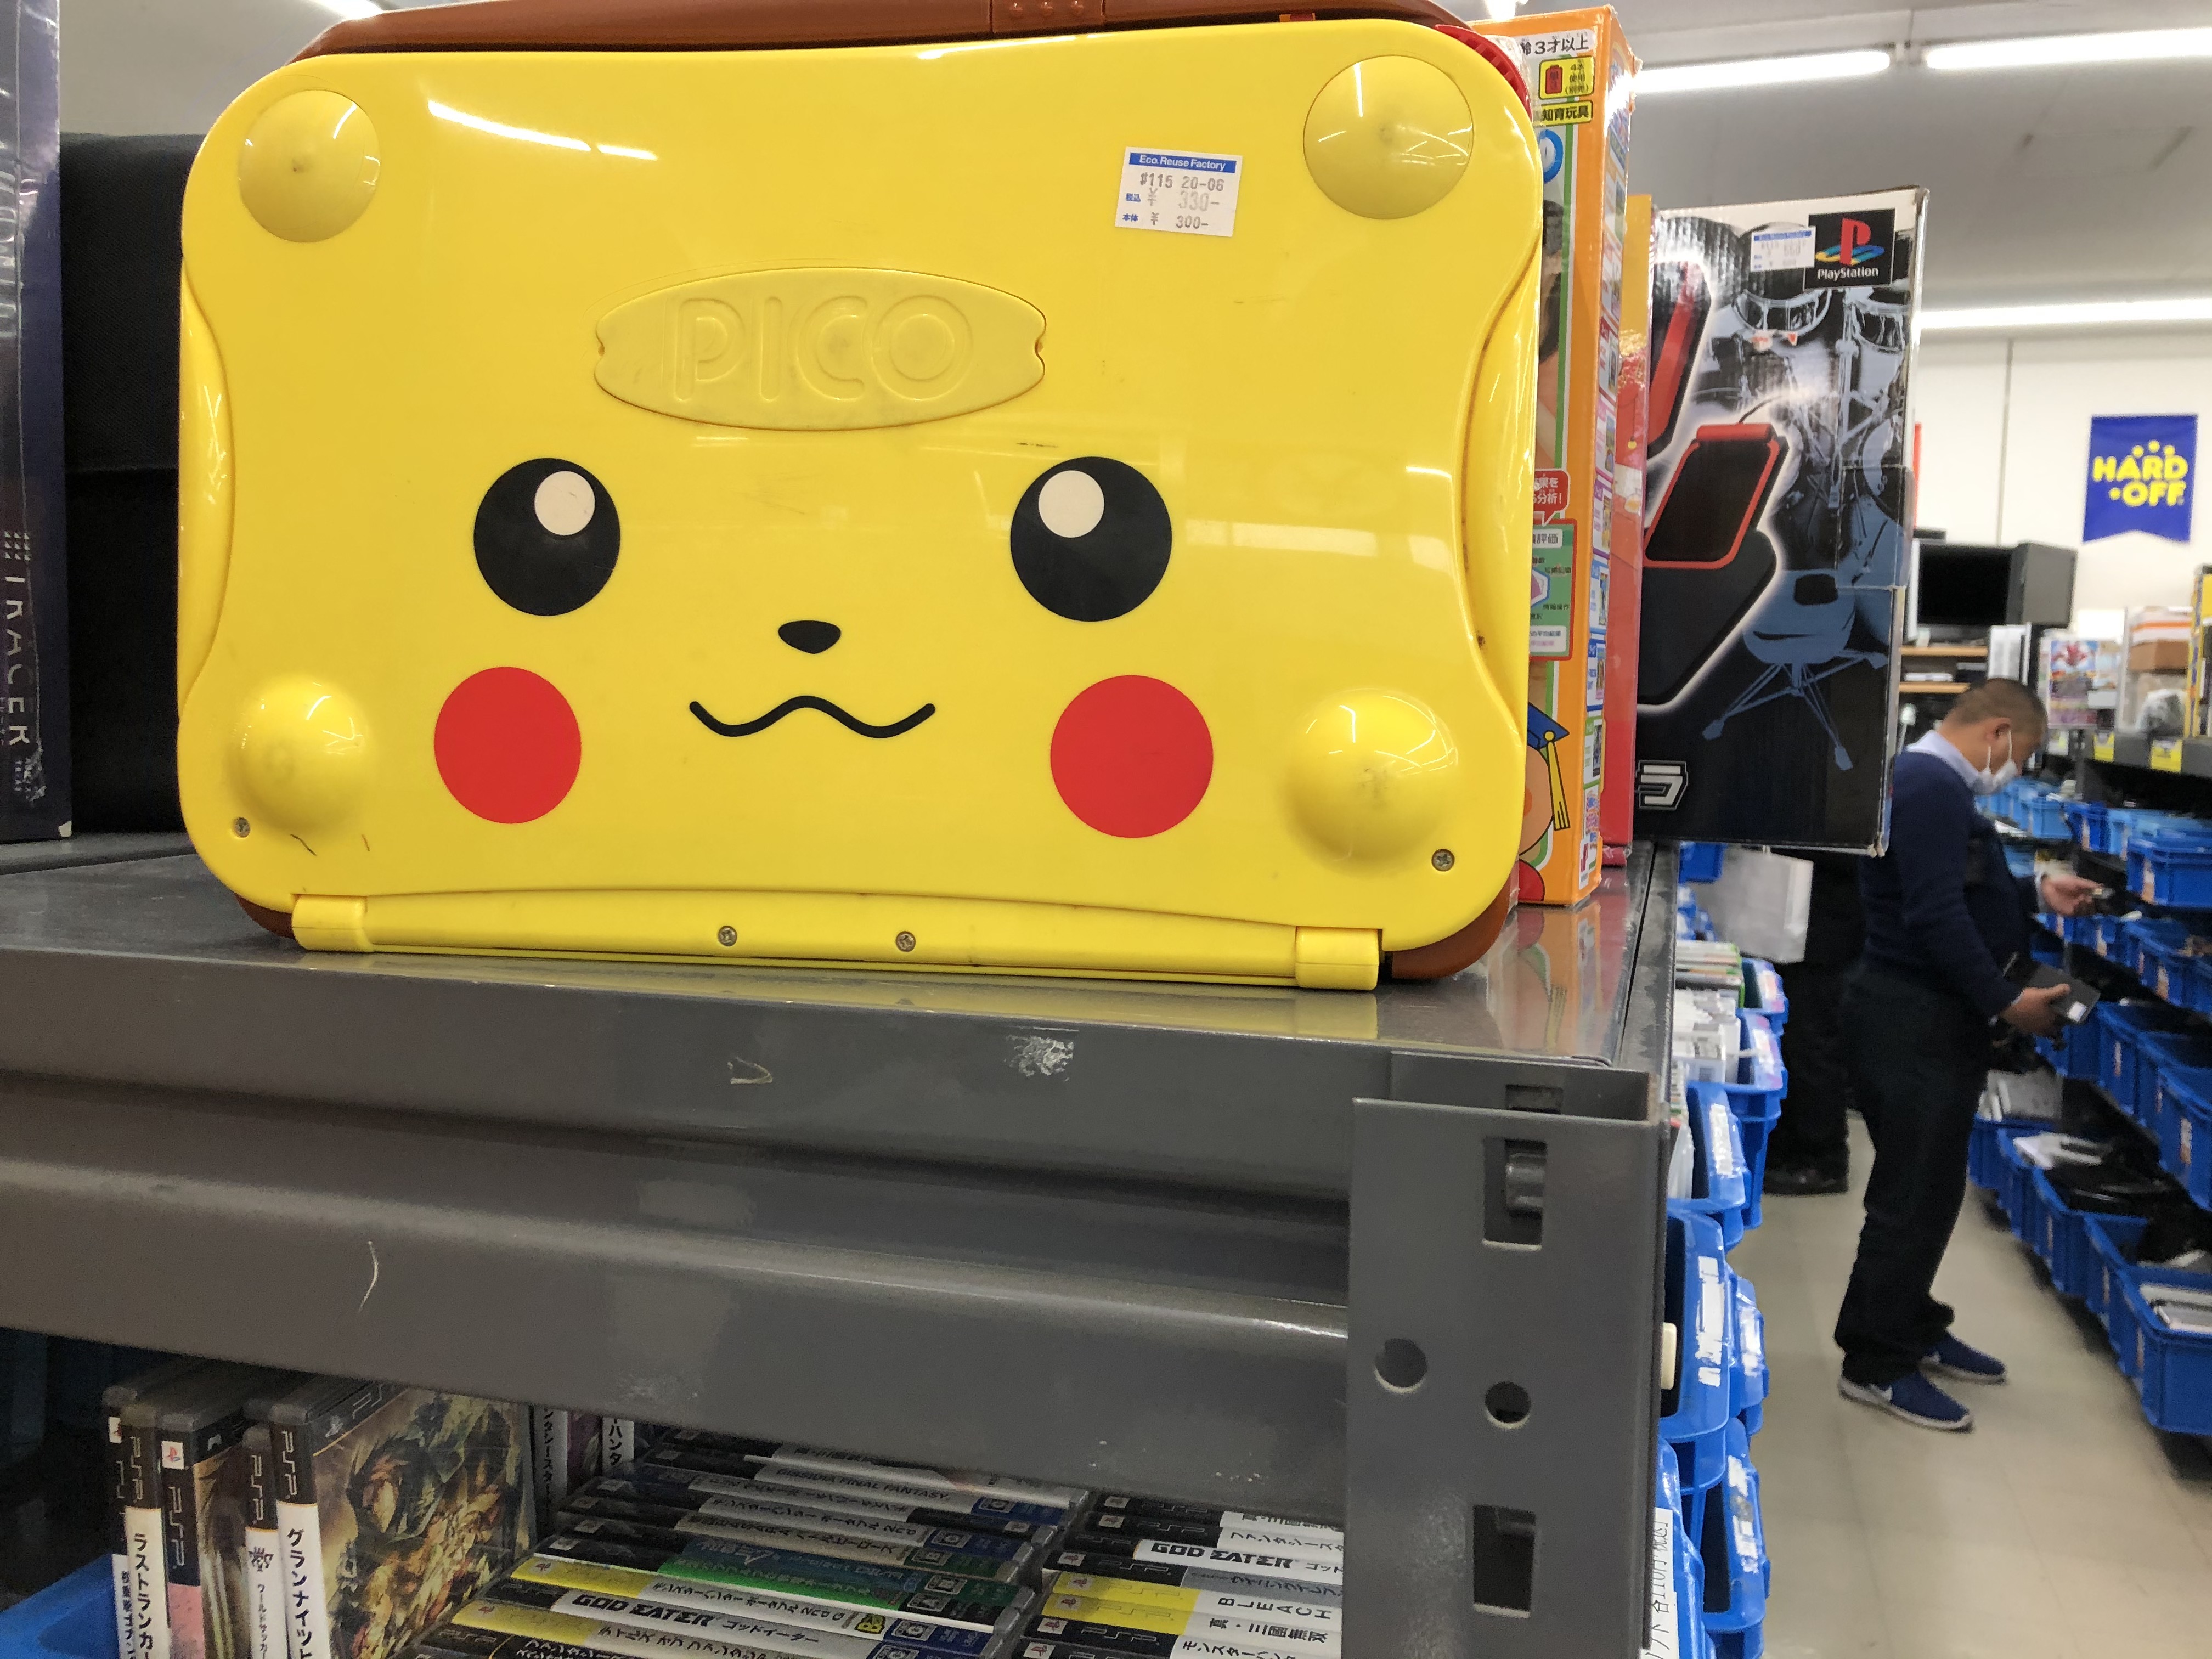 Pikachu plastic game console cover. Photo by Denisse Rauda.